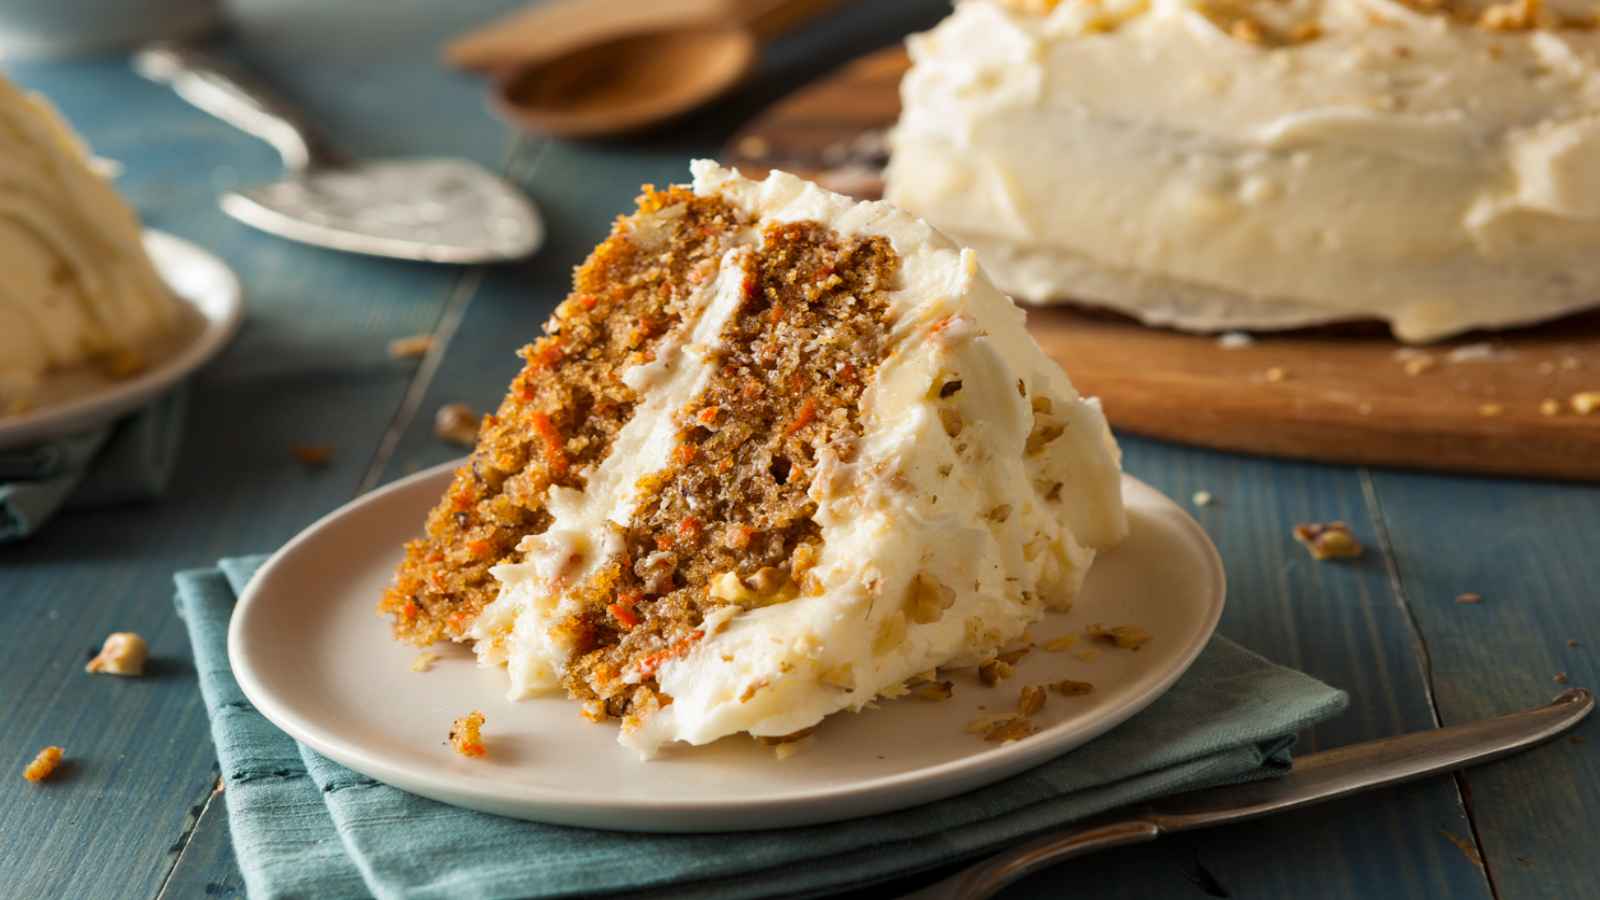 National Carrot Cake Day 2023: Date, History and How to Make